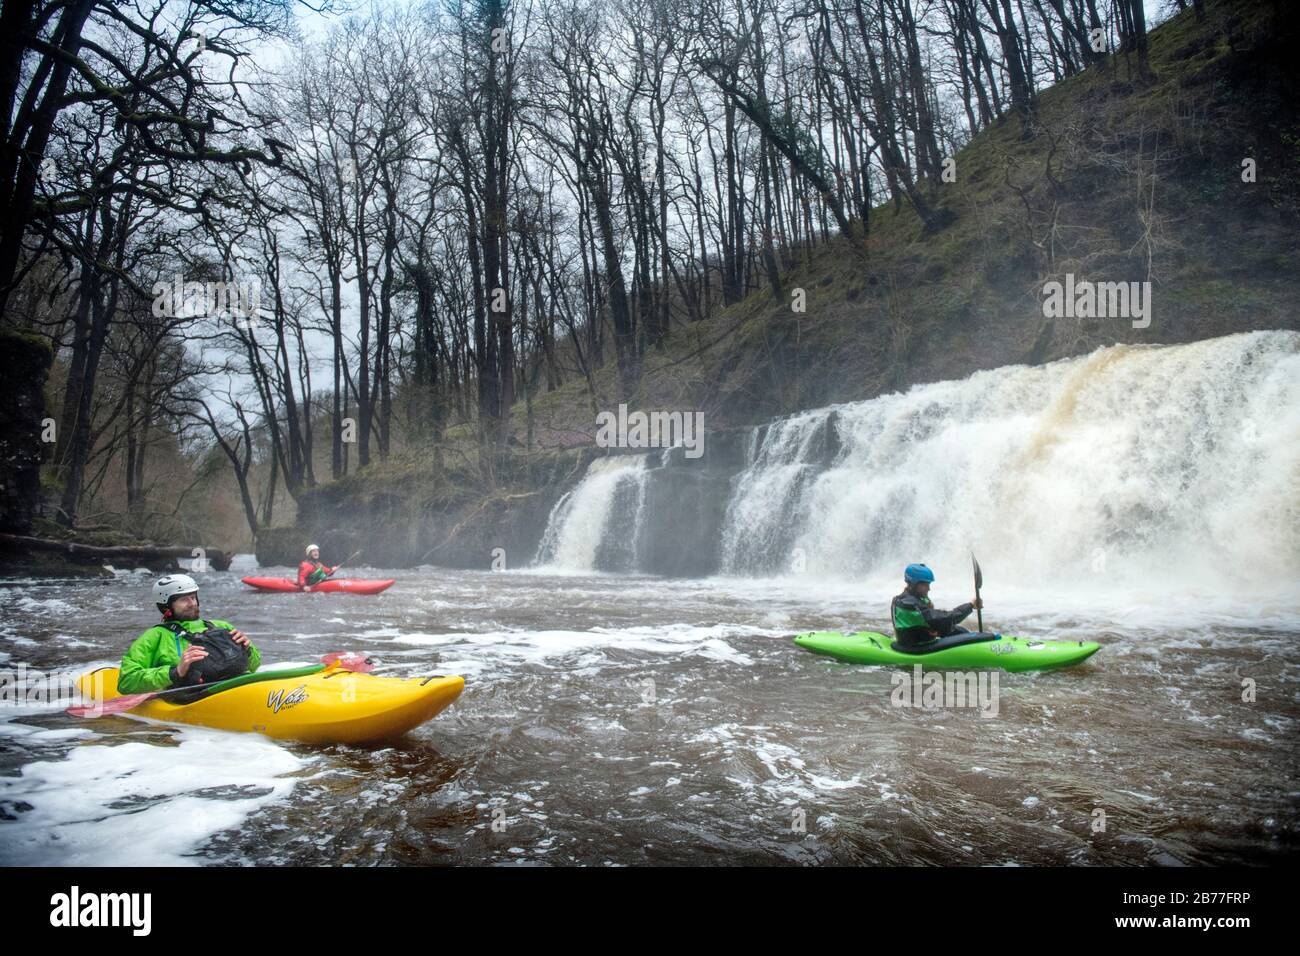 Kayakers rest in the plunge pool after riding the Sgwd y Pannwr falls on the River Mellte near Pontneddfechan in the Brecon Beacons, Wales UK Stock Photo